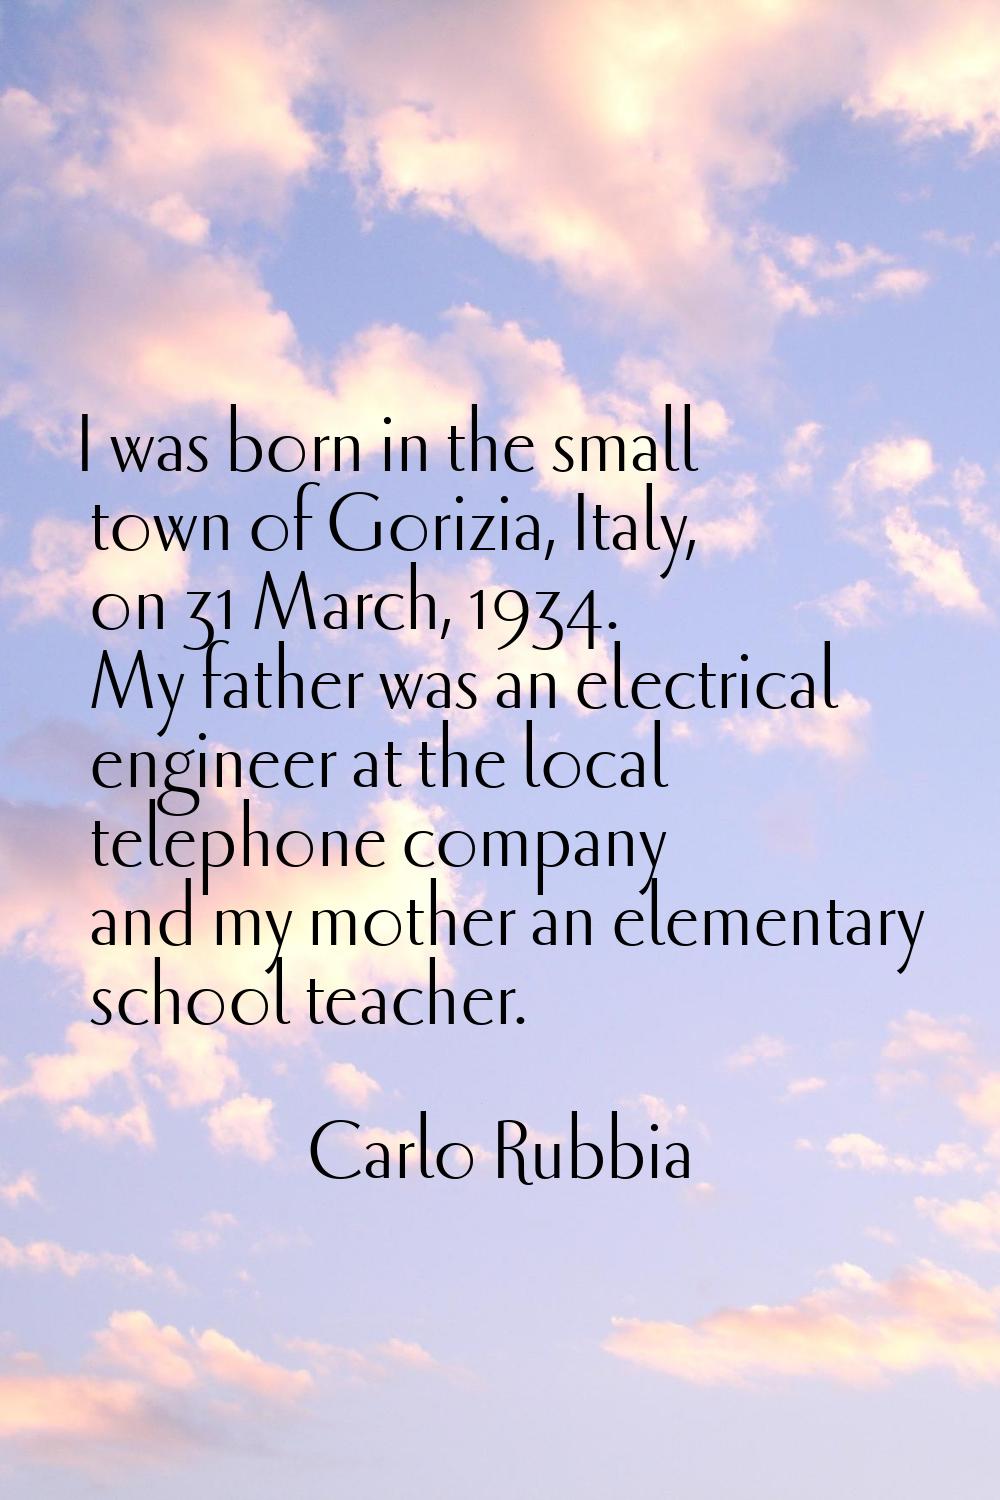 I was born in the small town of Gorizia, Italy, on 31 March, 1934. My father was an electrical engi